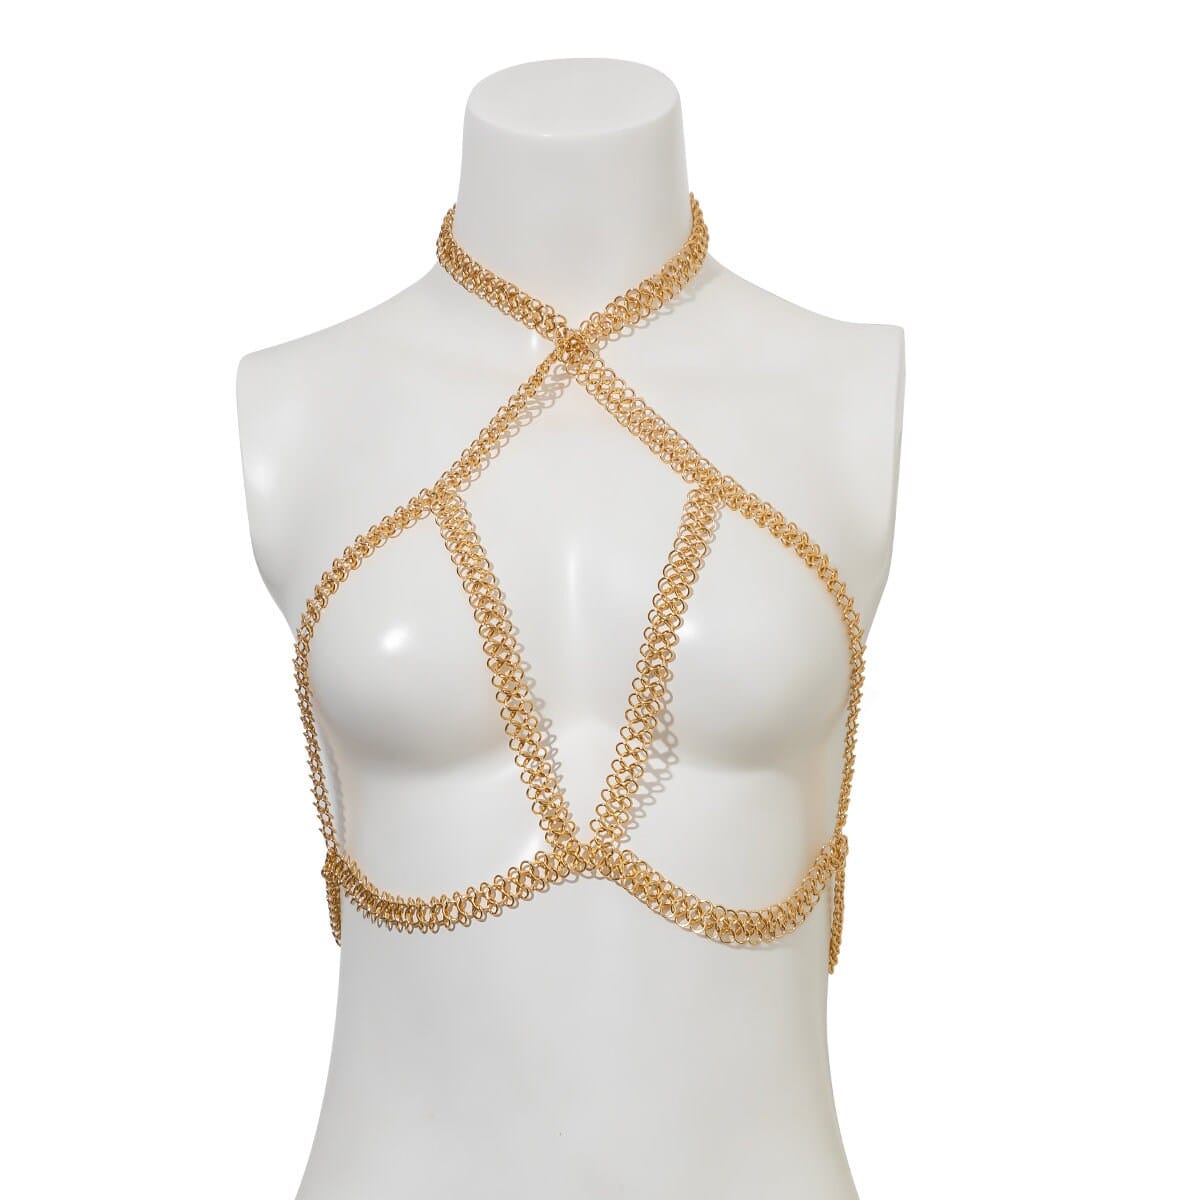 Boho Layered Gold Silver Tone Hollow Body Chain Harness Bralette